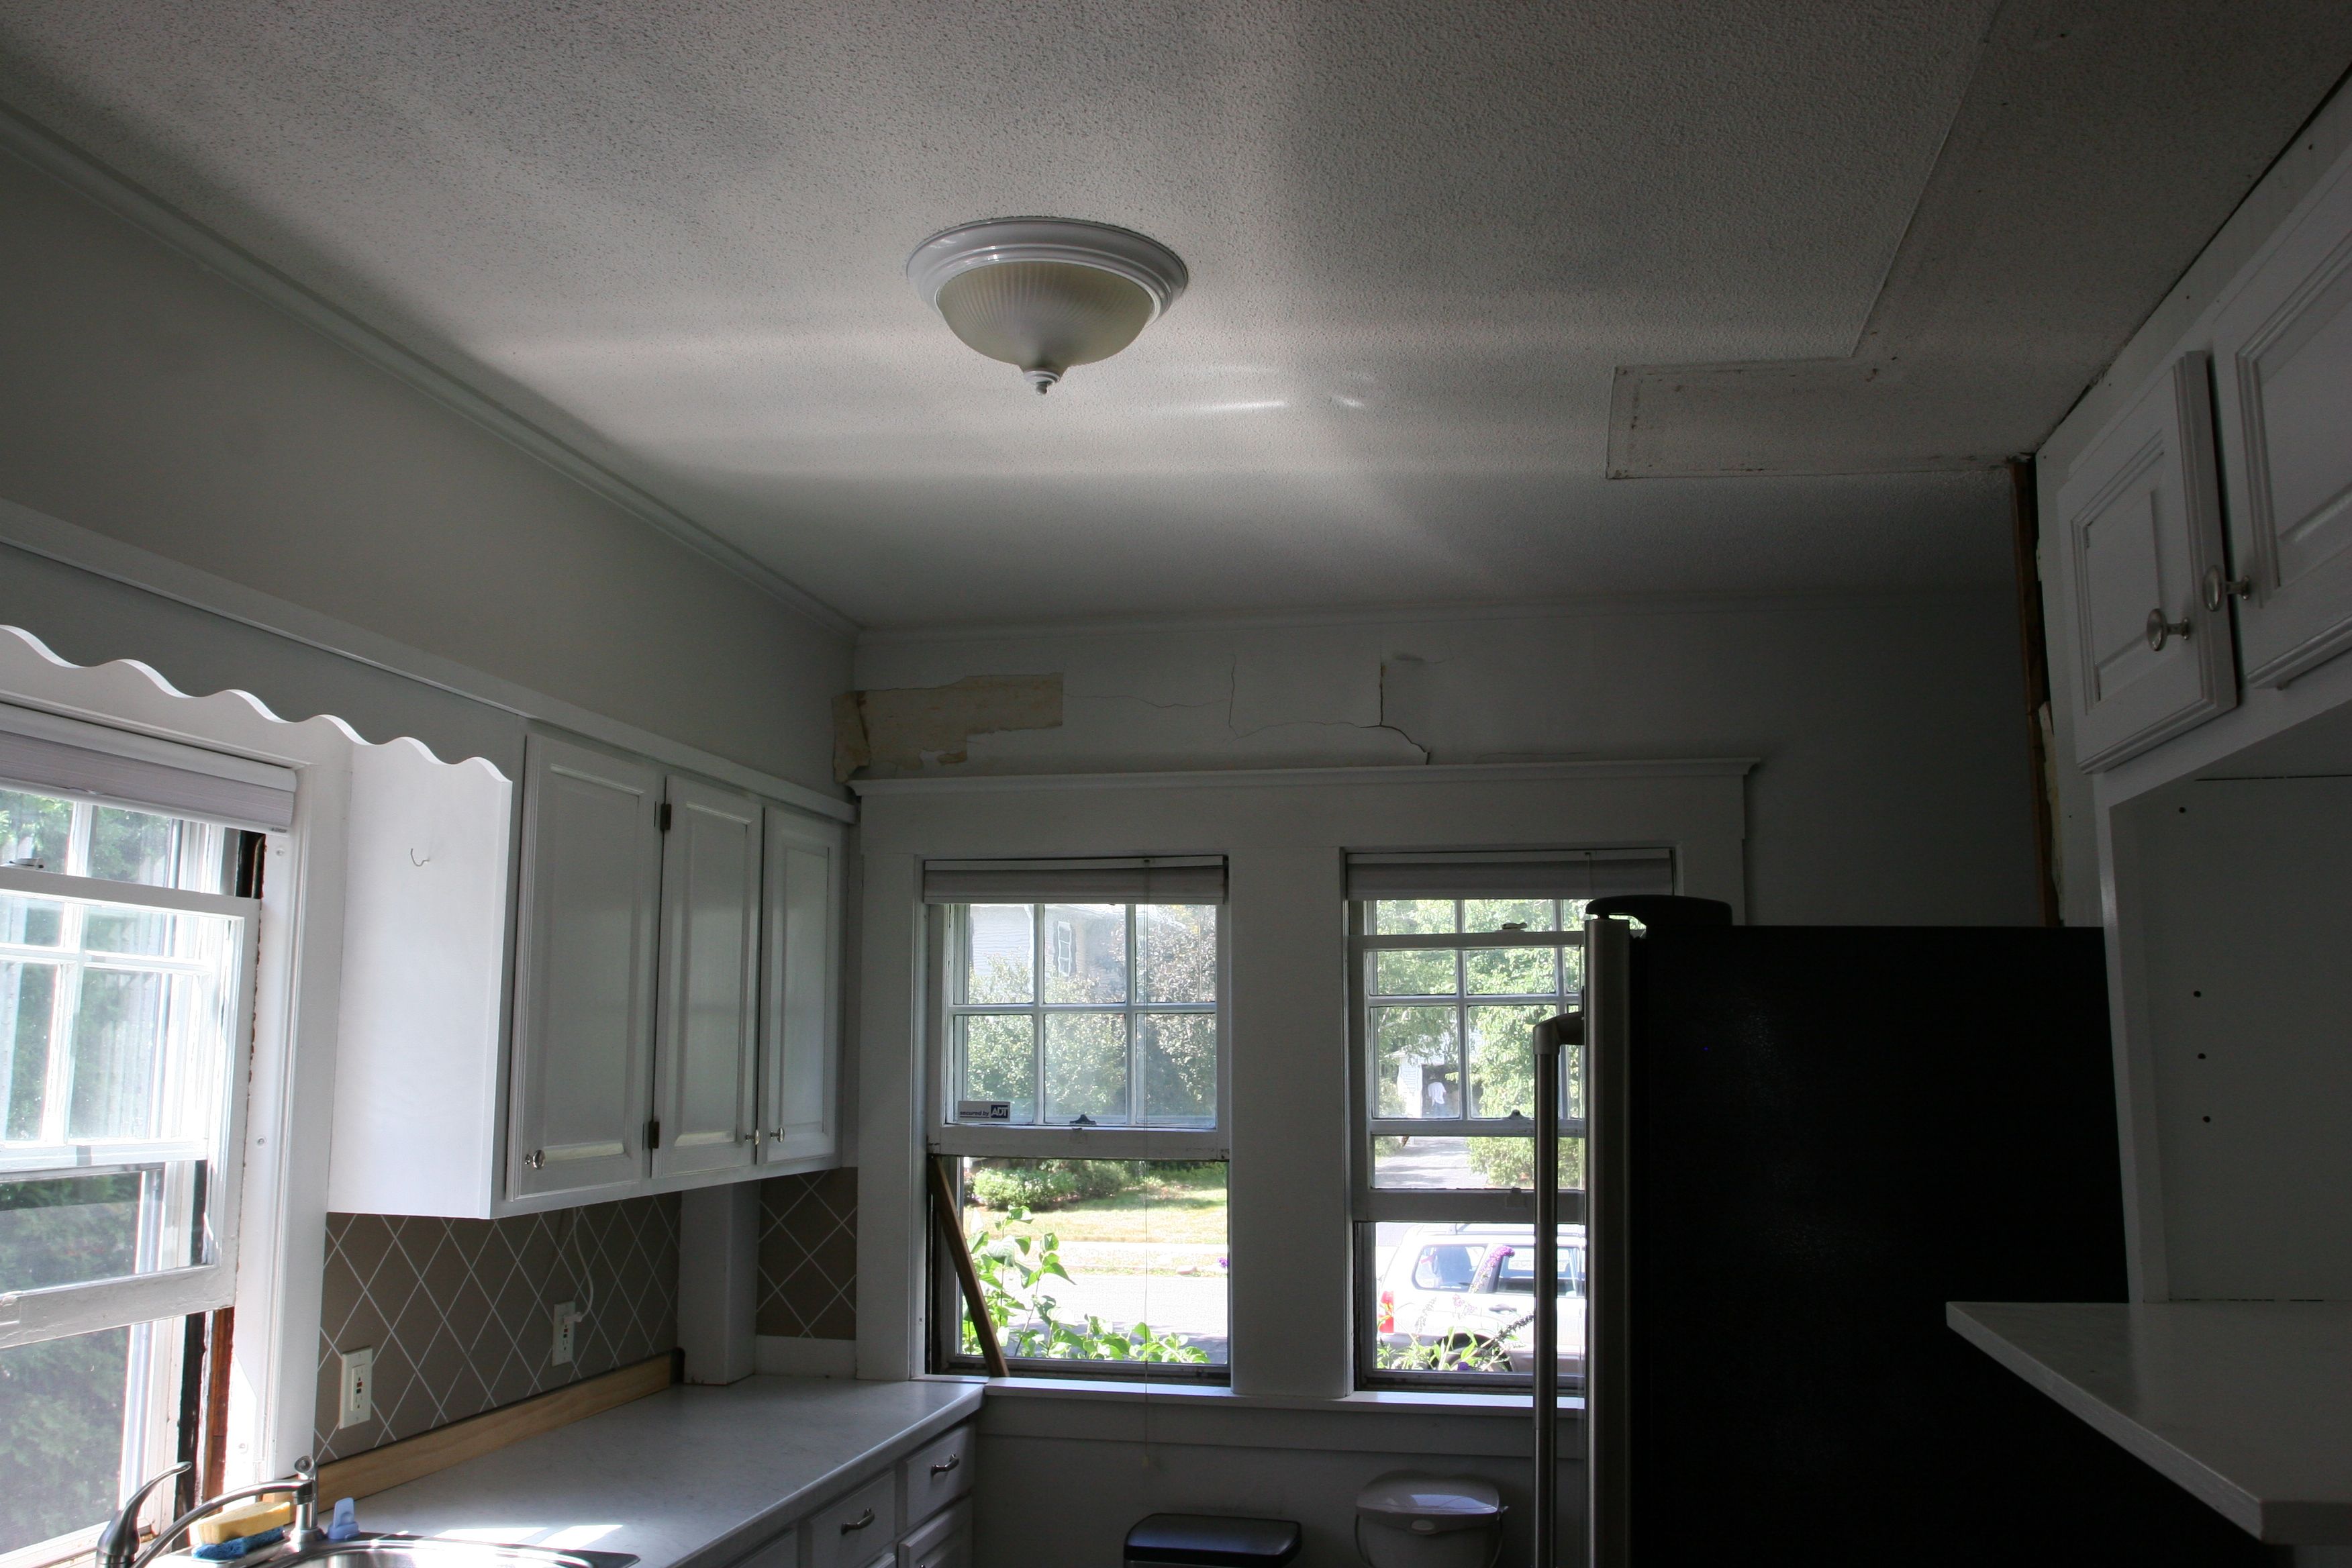 When you looked to the front of the kitchen, the windows were partially obscured by the side of the fridge.